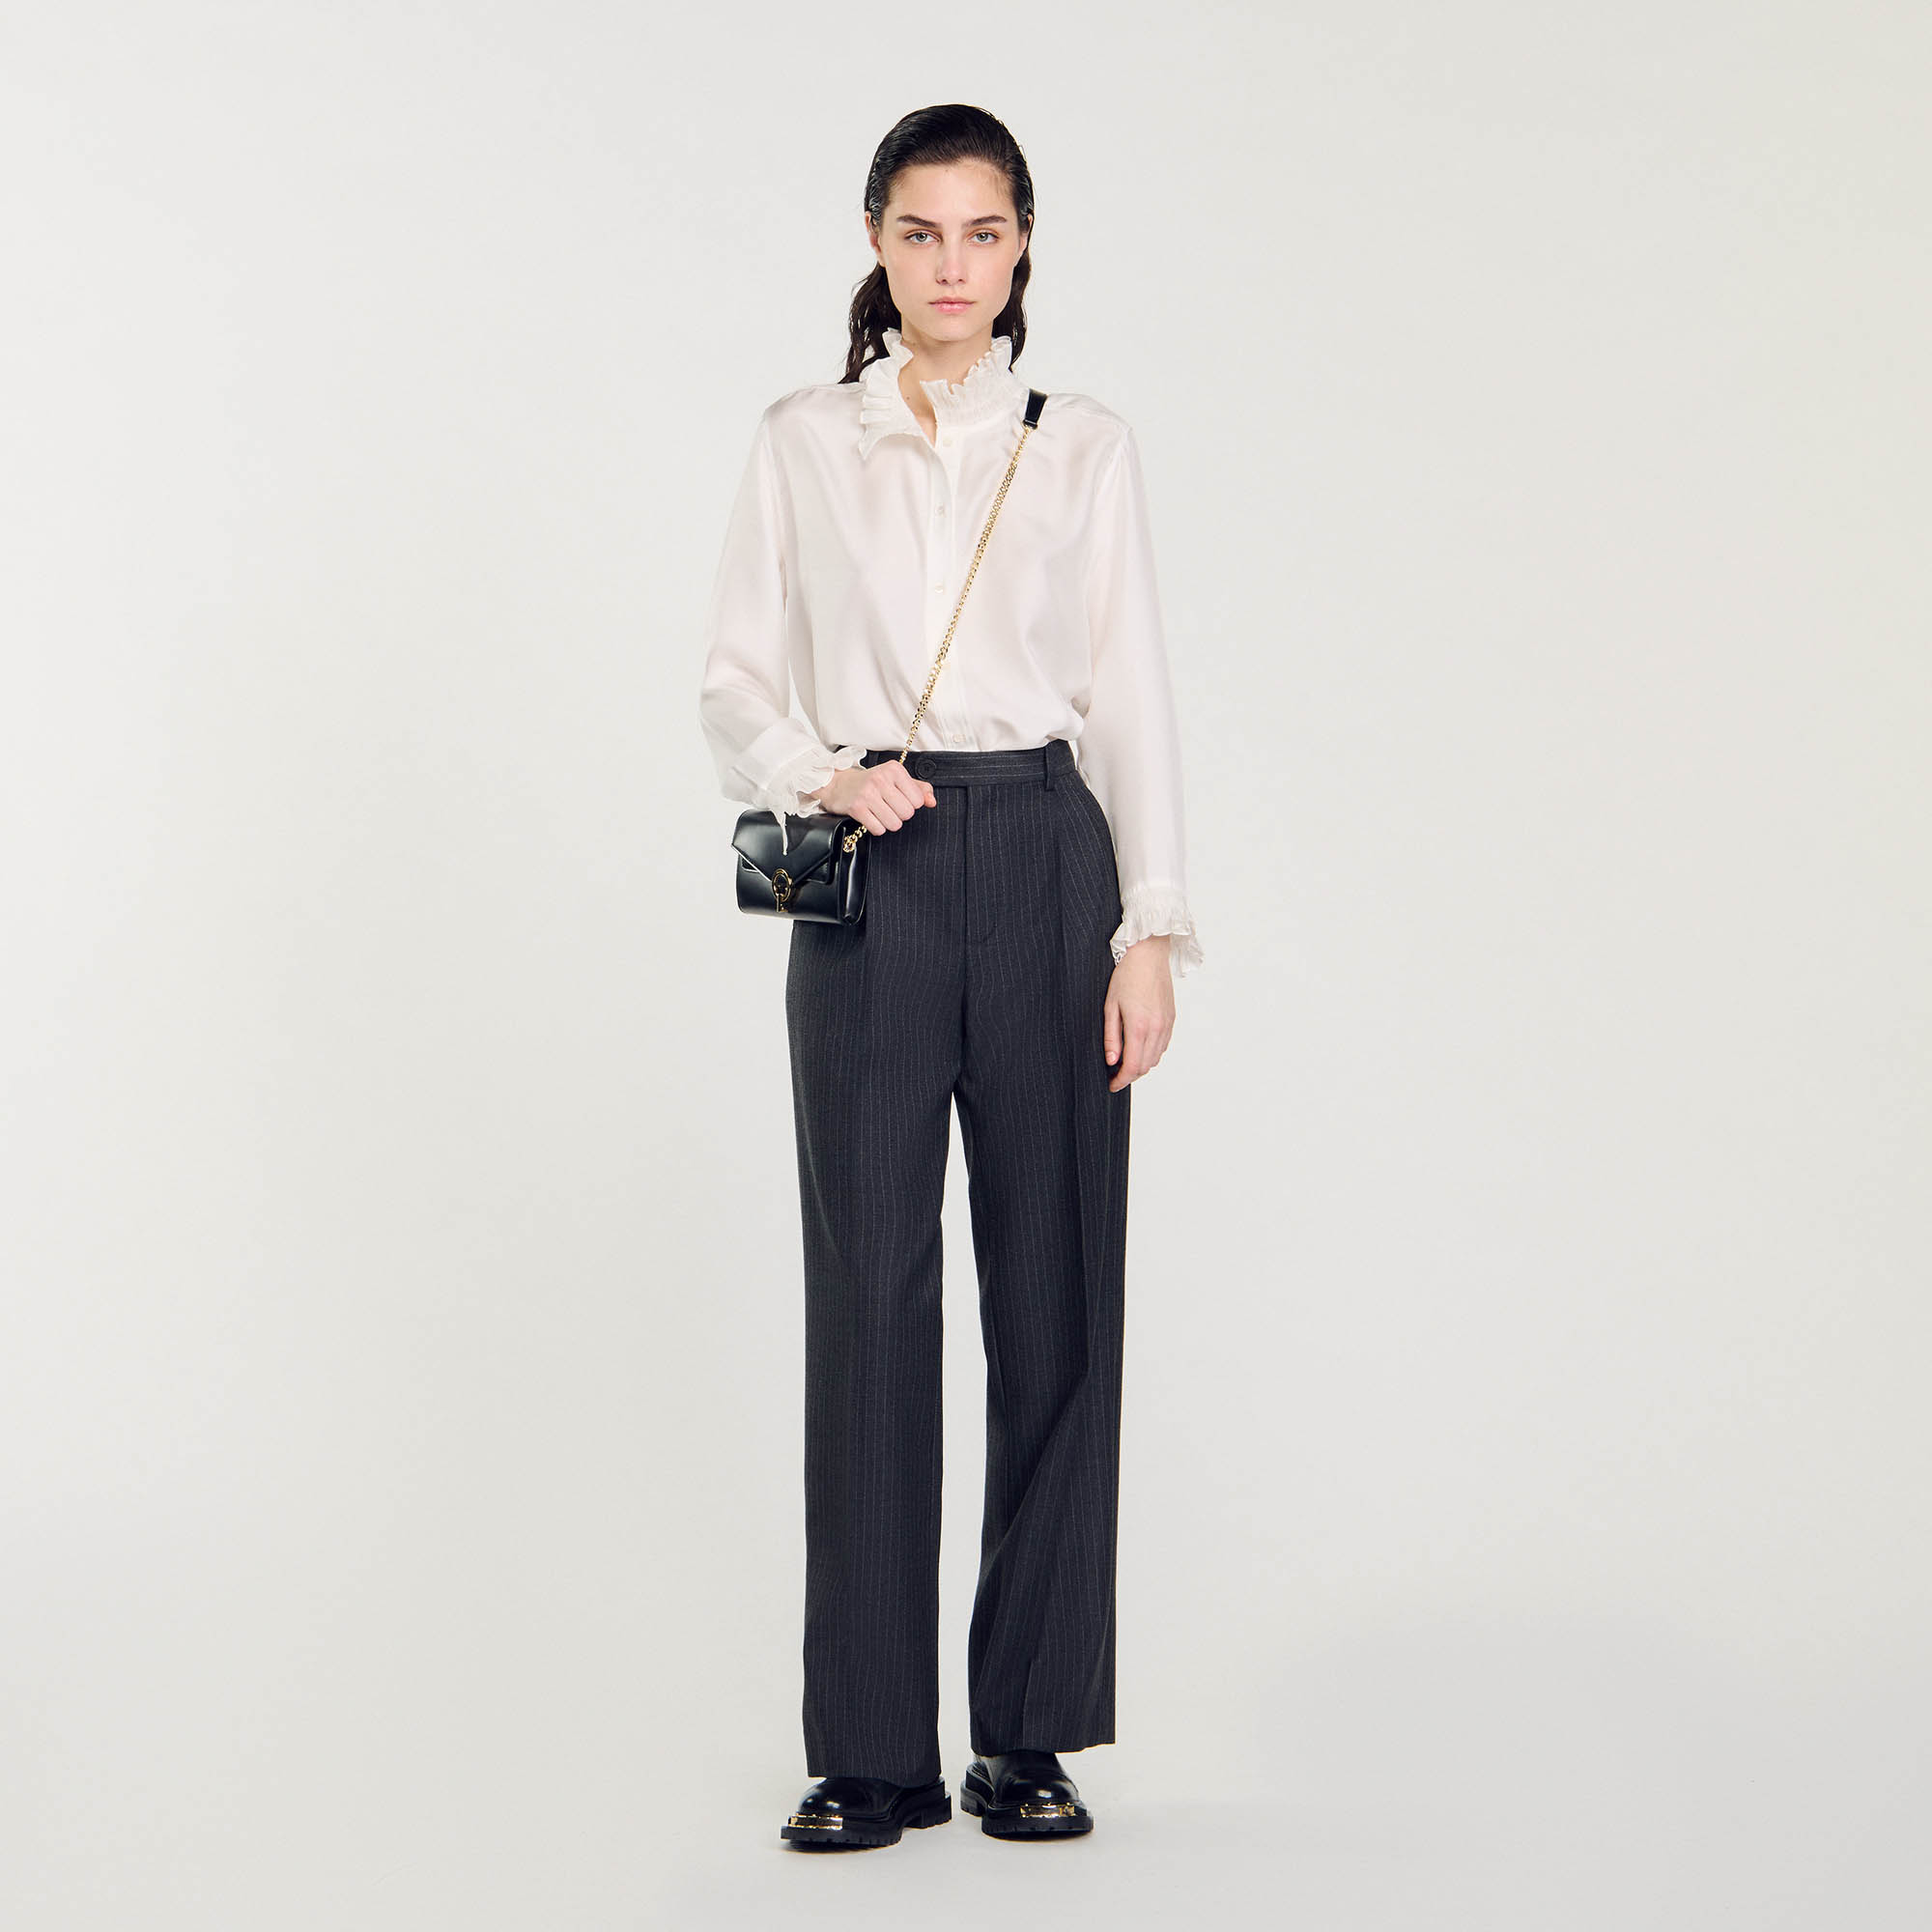 Sandro wool Lining: Straight-leg, oversize wool pants with ironed creases, embellished with fine stripes, side pockets and welt pockets on the back